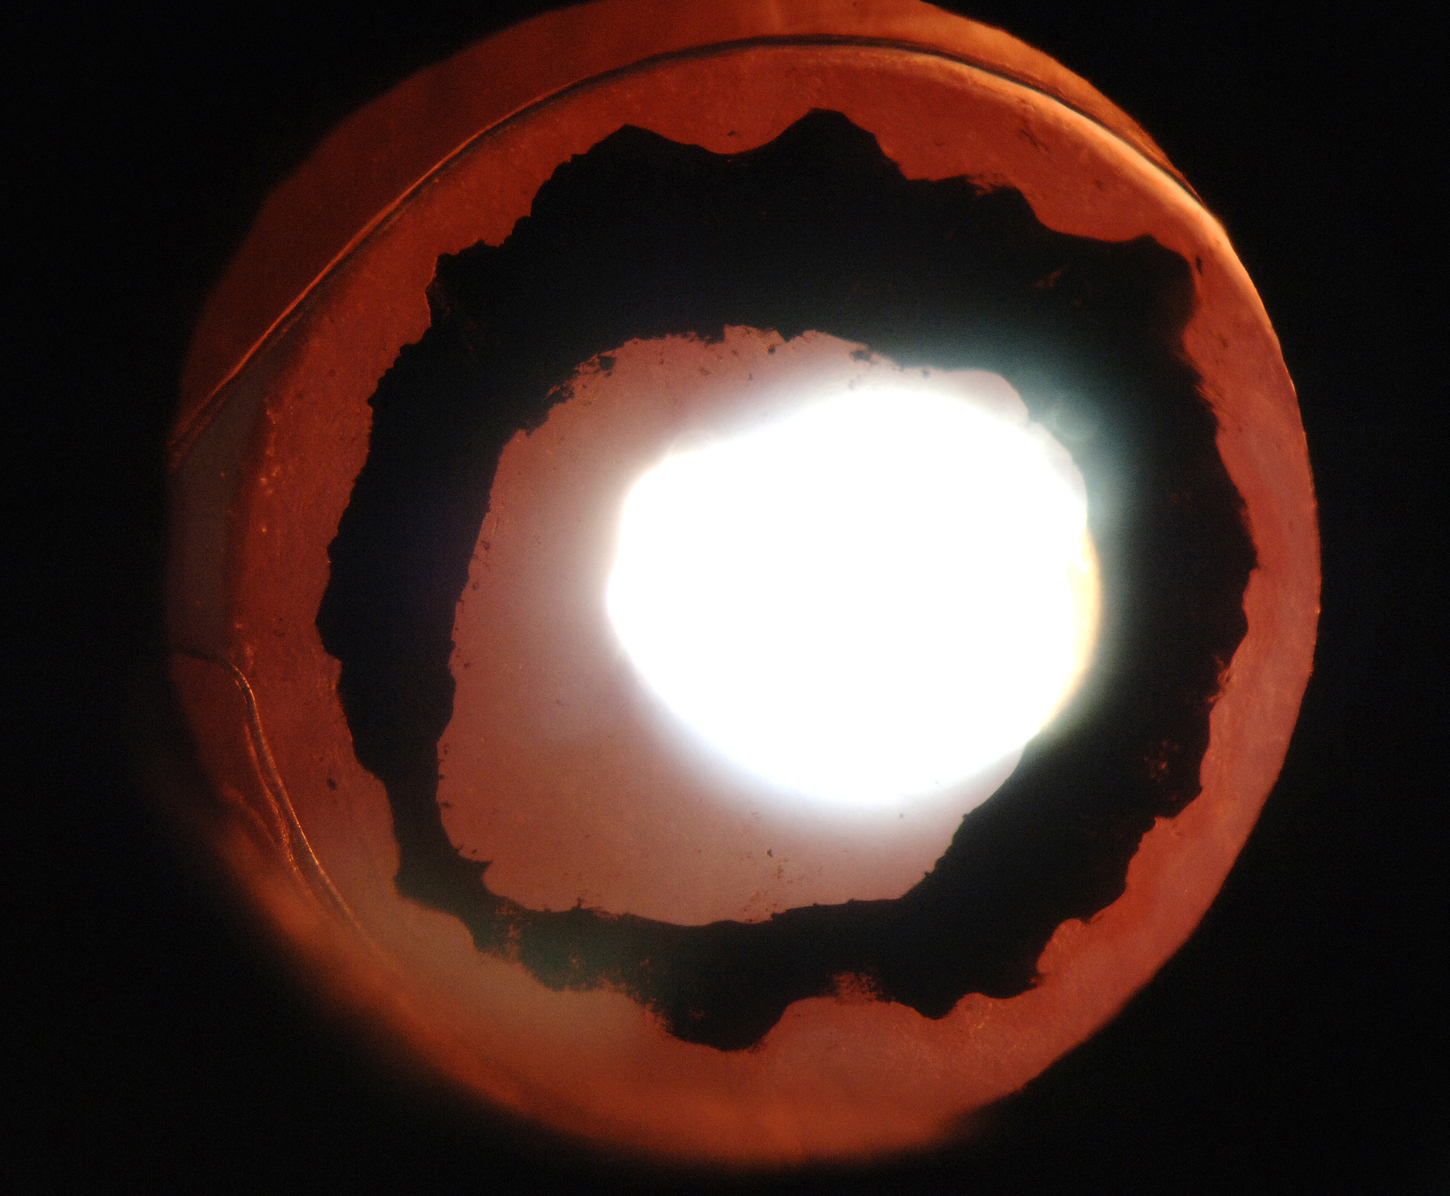 Pseudo-Vossius ring after Descemet stripping automated endothelial keratoplasty